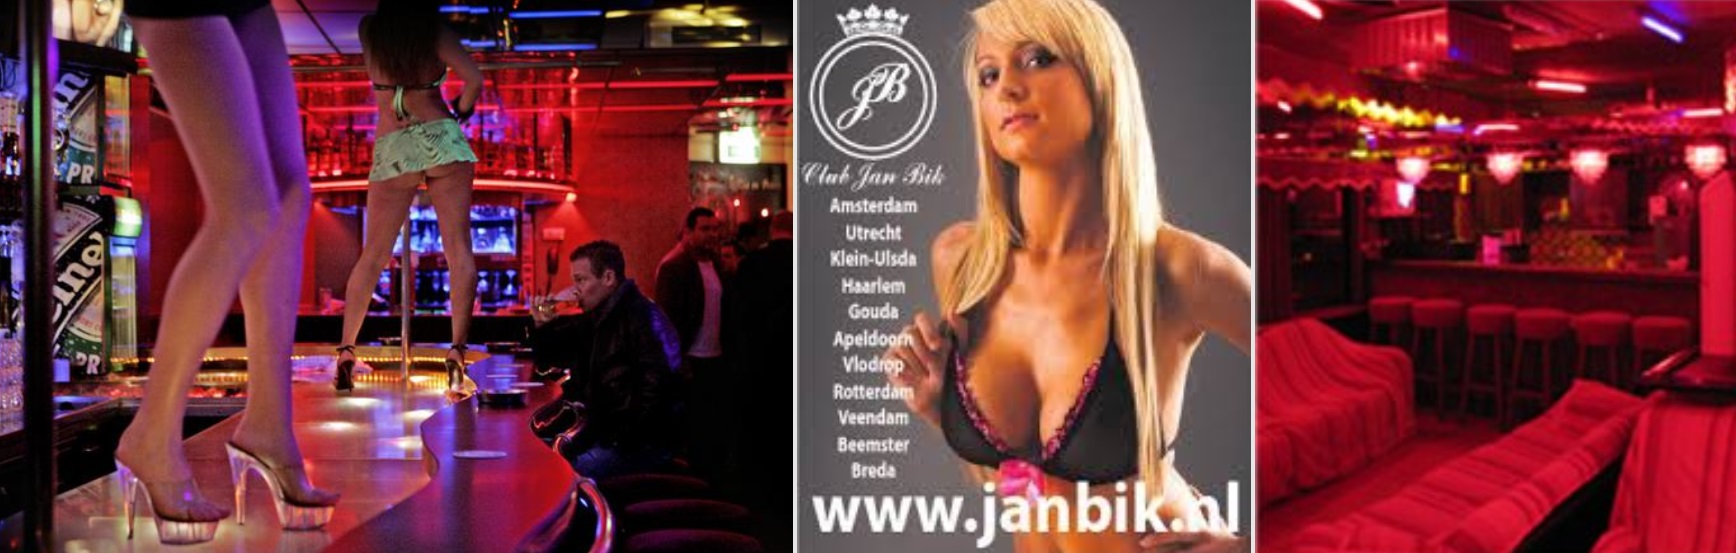 Amsterdam Sex Clubs Group - Sex Clubs In Amsterdam Fun With Escorts Drinks and Dance ...